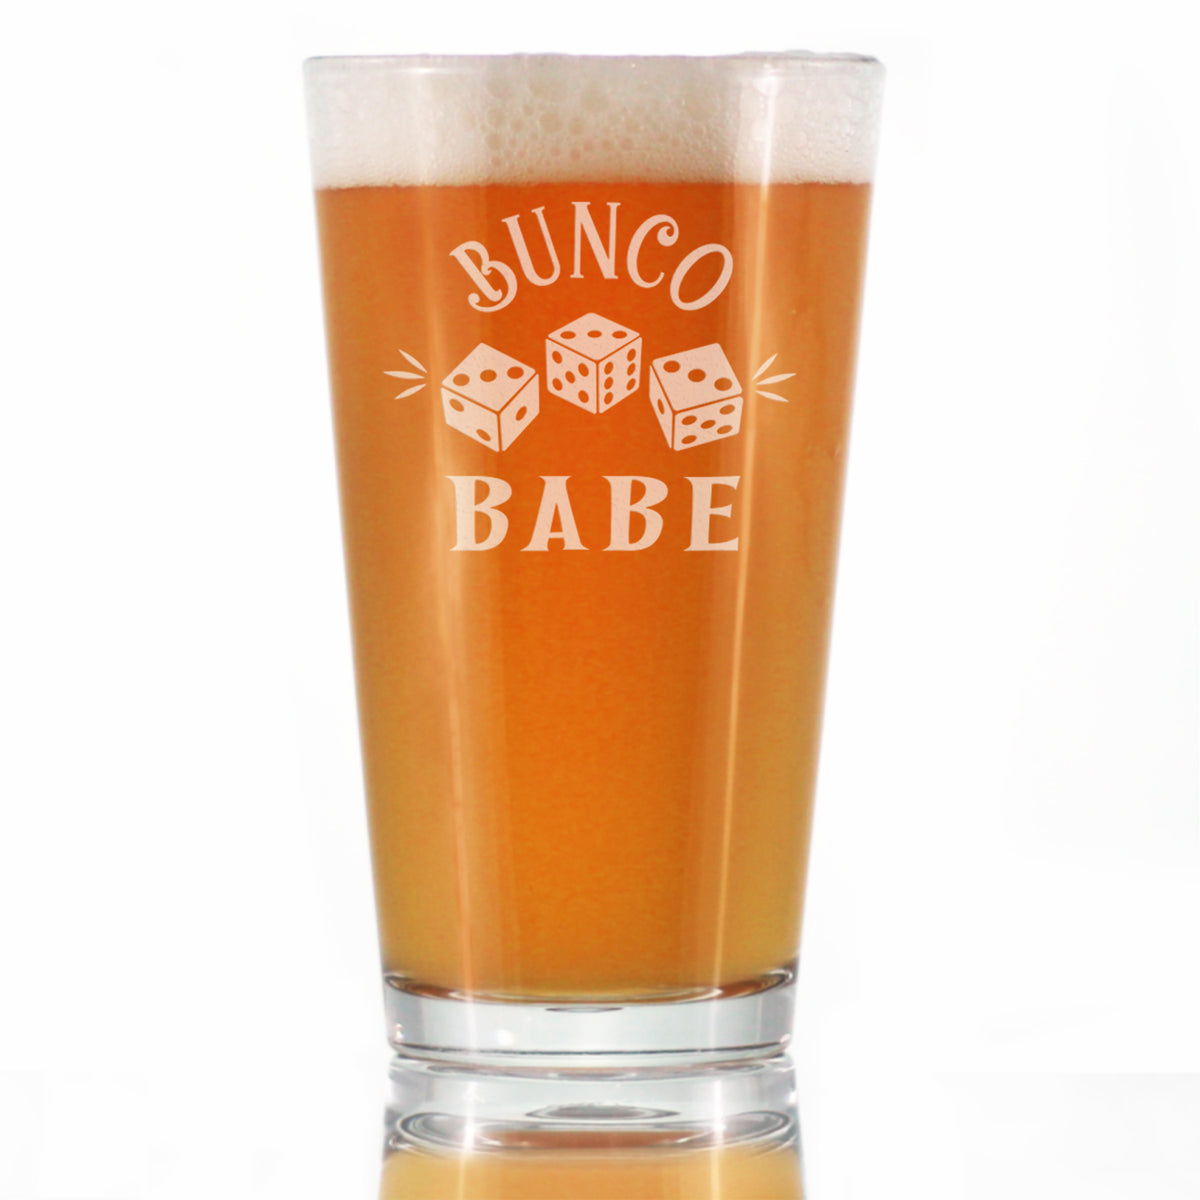 Bunco Babe Pint Glass for Beer - Bunco Decor and Bunco Gifts for Women - 16 Oz Glasses